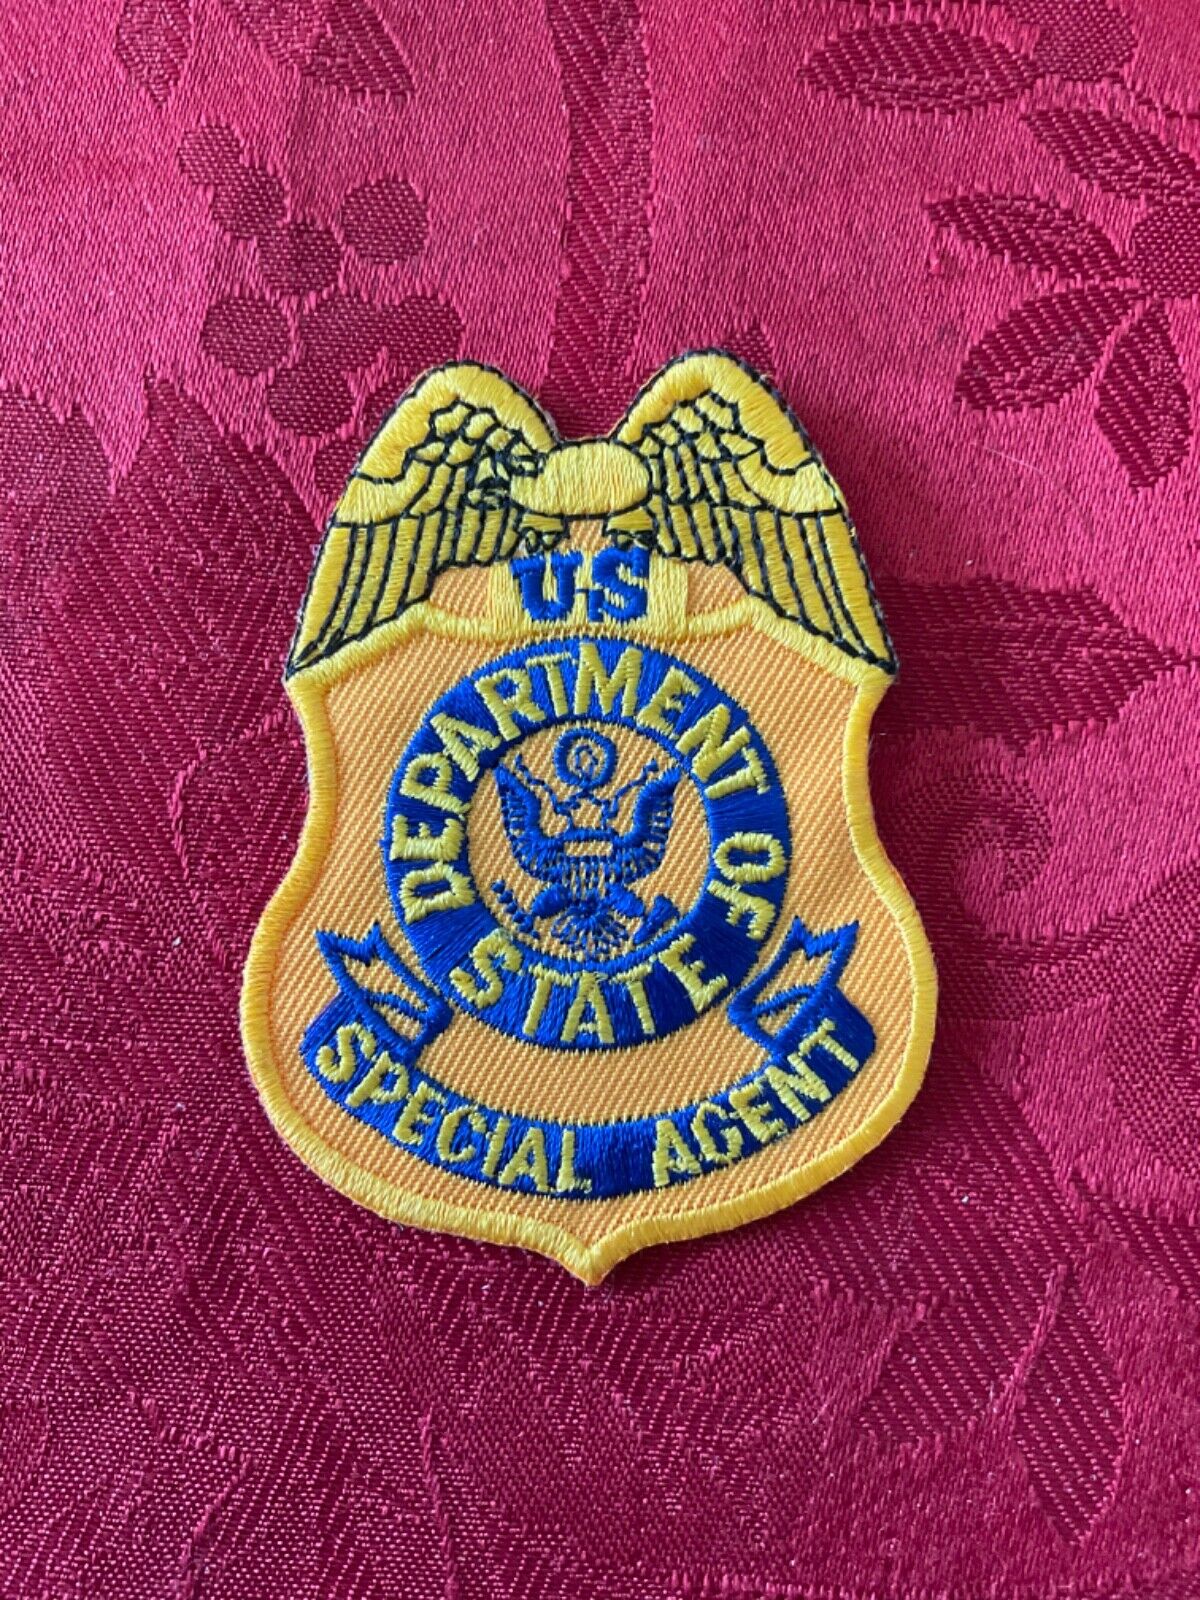 U.S. DEPARTMENT OF STATE SPECIA AGENT PATCH - BRAND NEW